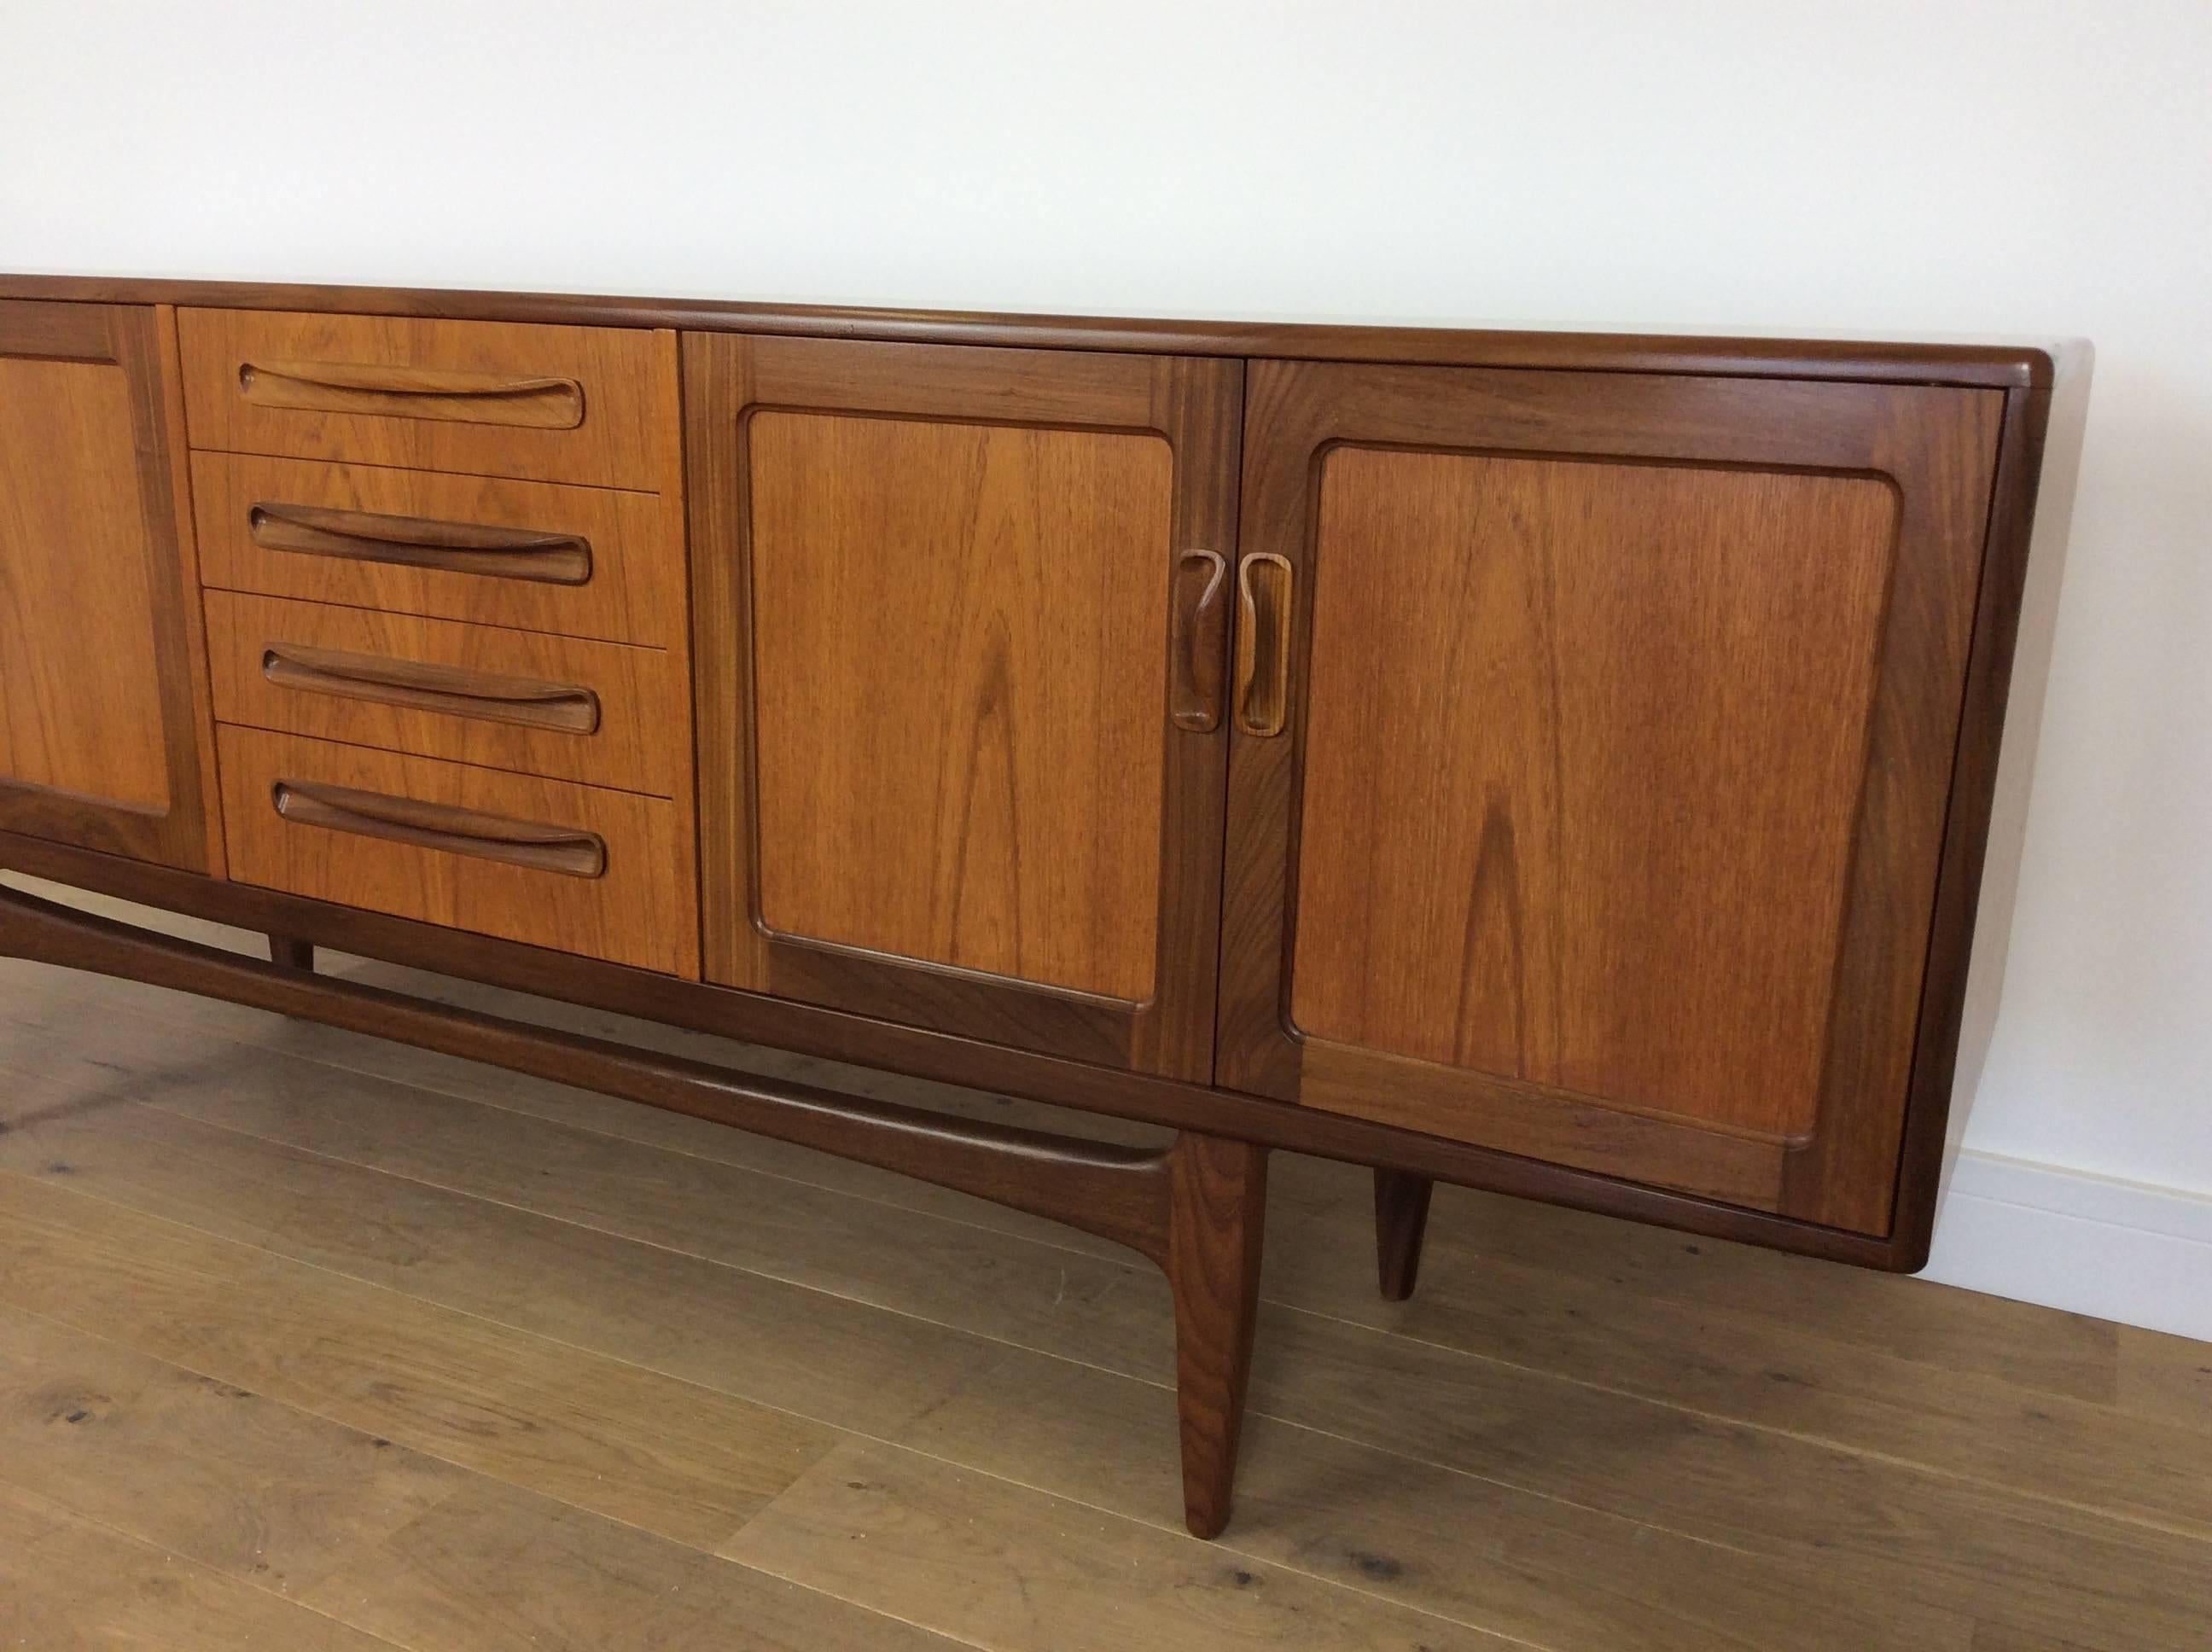 English Midcentury Sideboard Credenza by V B Wilkins